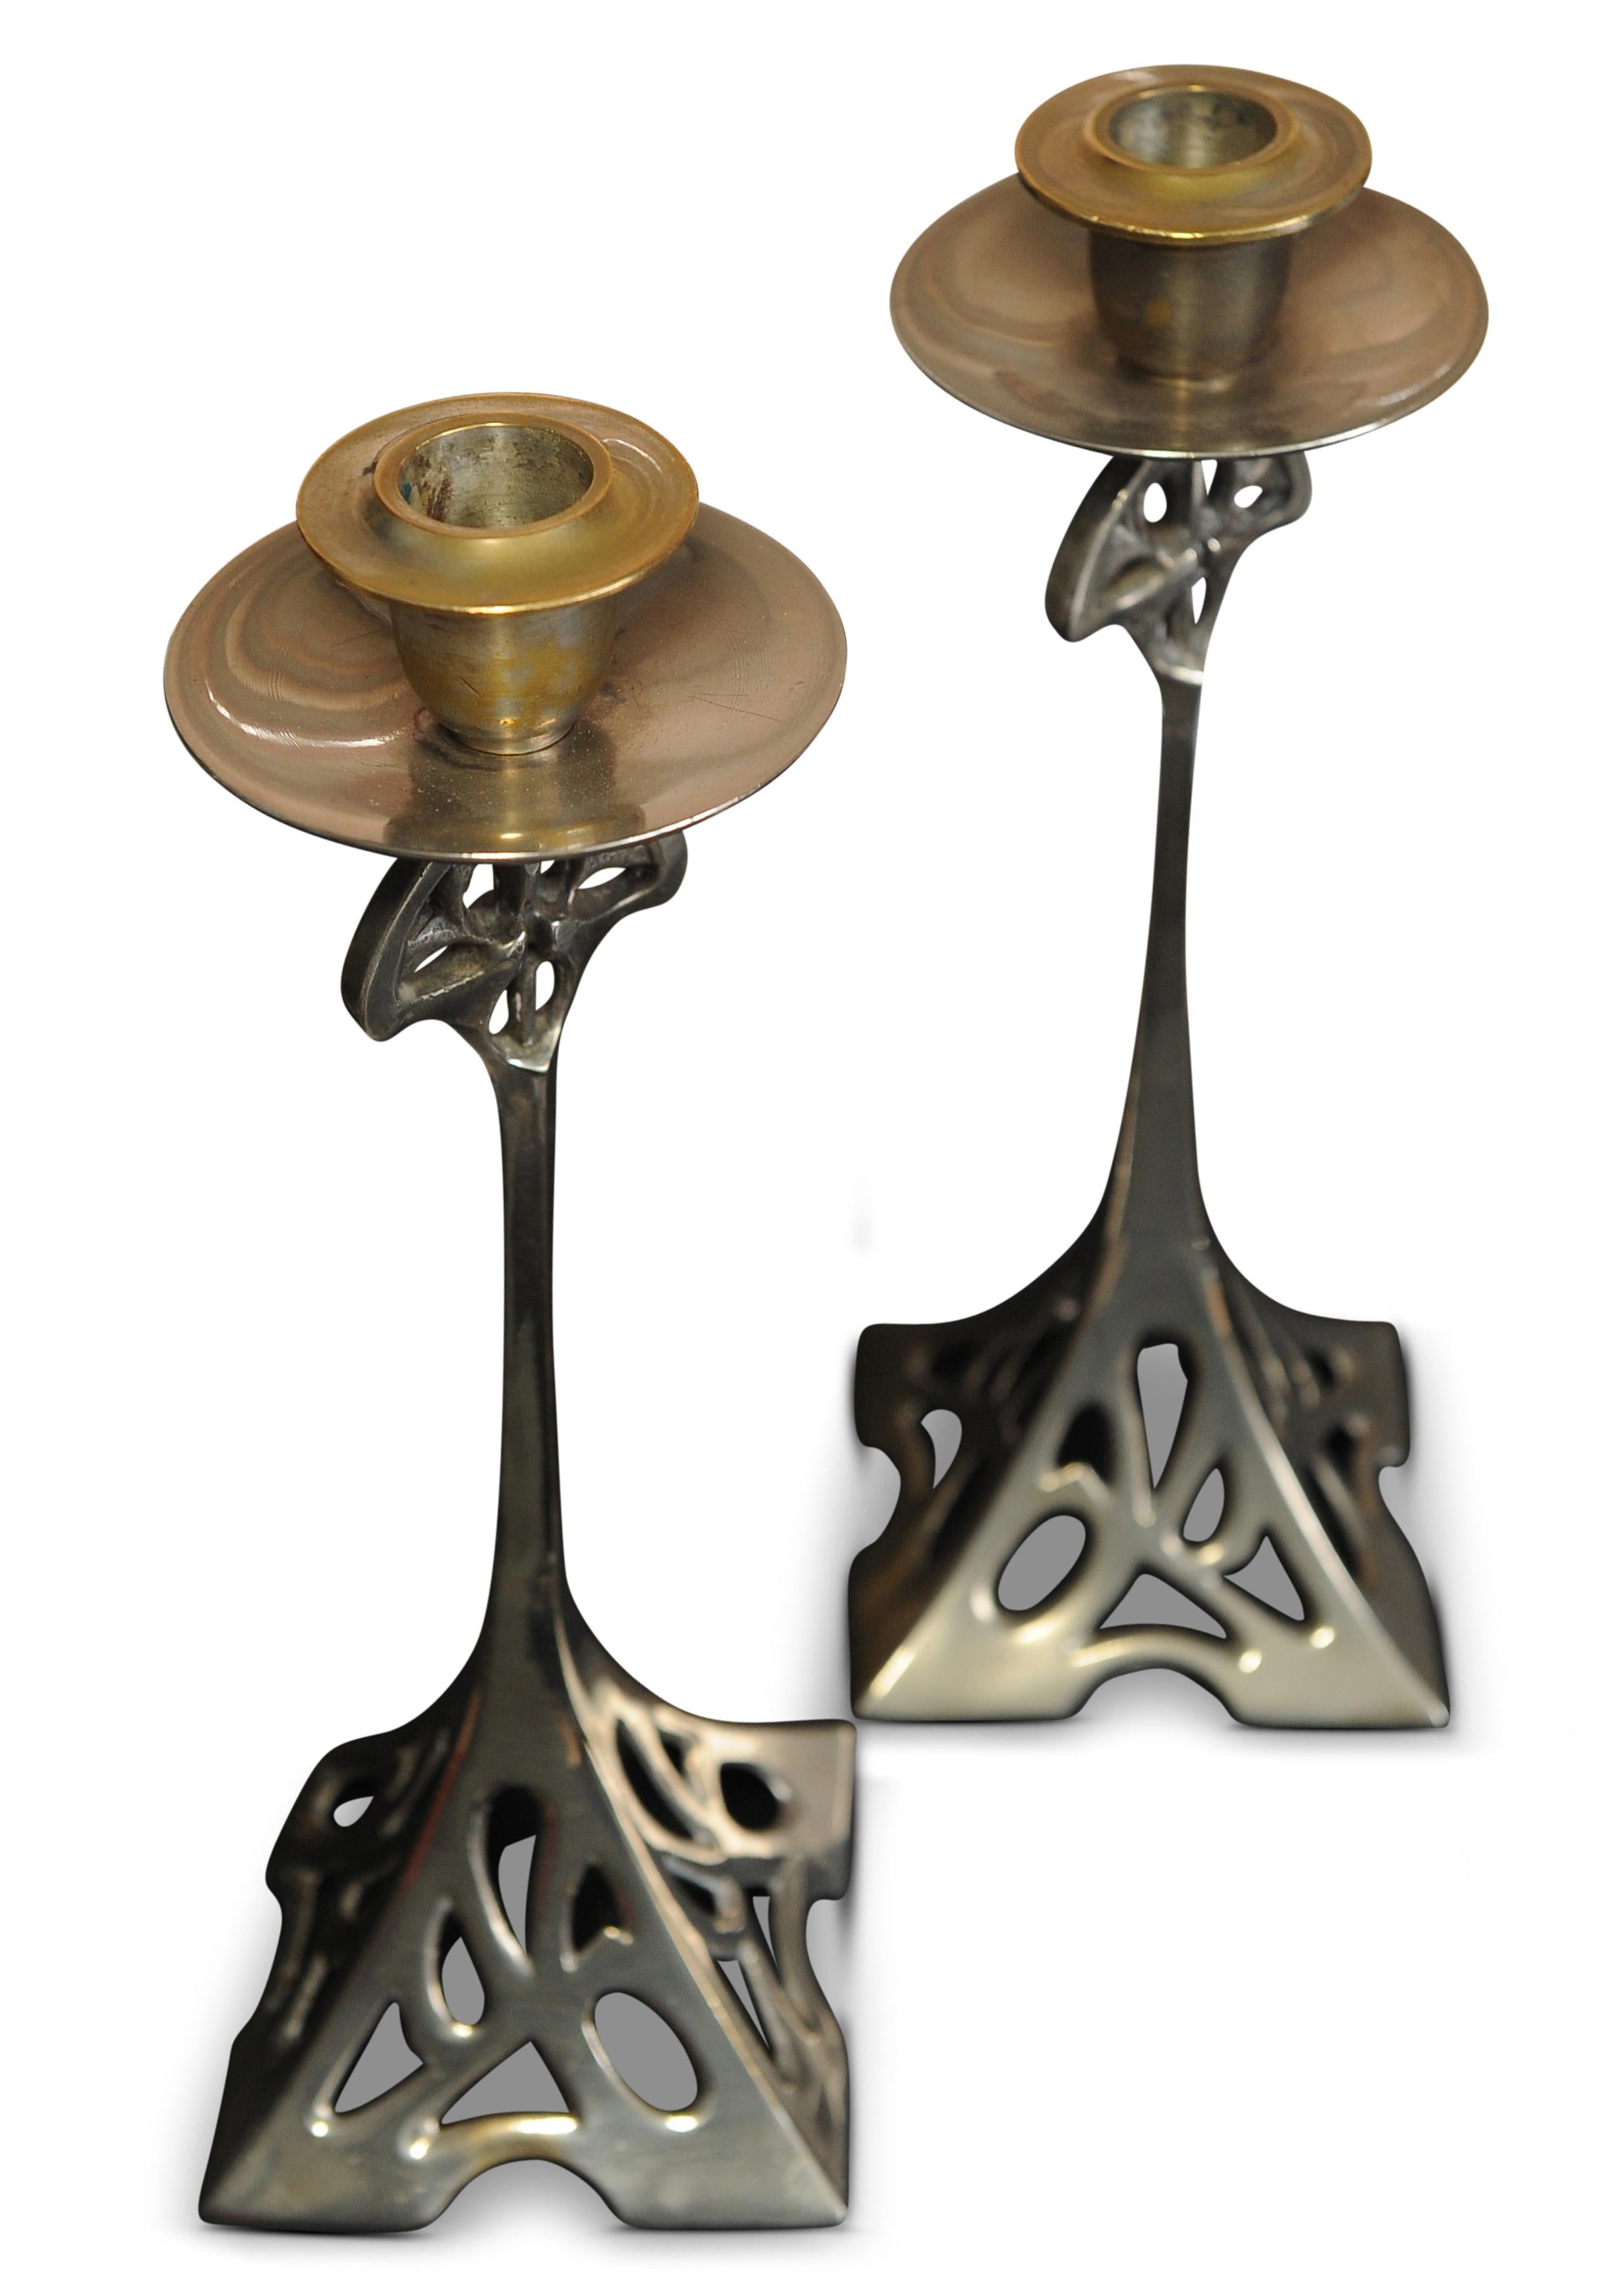 Hand-Crafted Matching Set Of Arts & Crafts Candlesticks Liberty of London 1910's For Sale